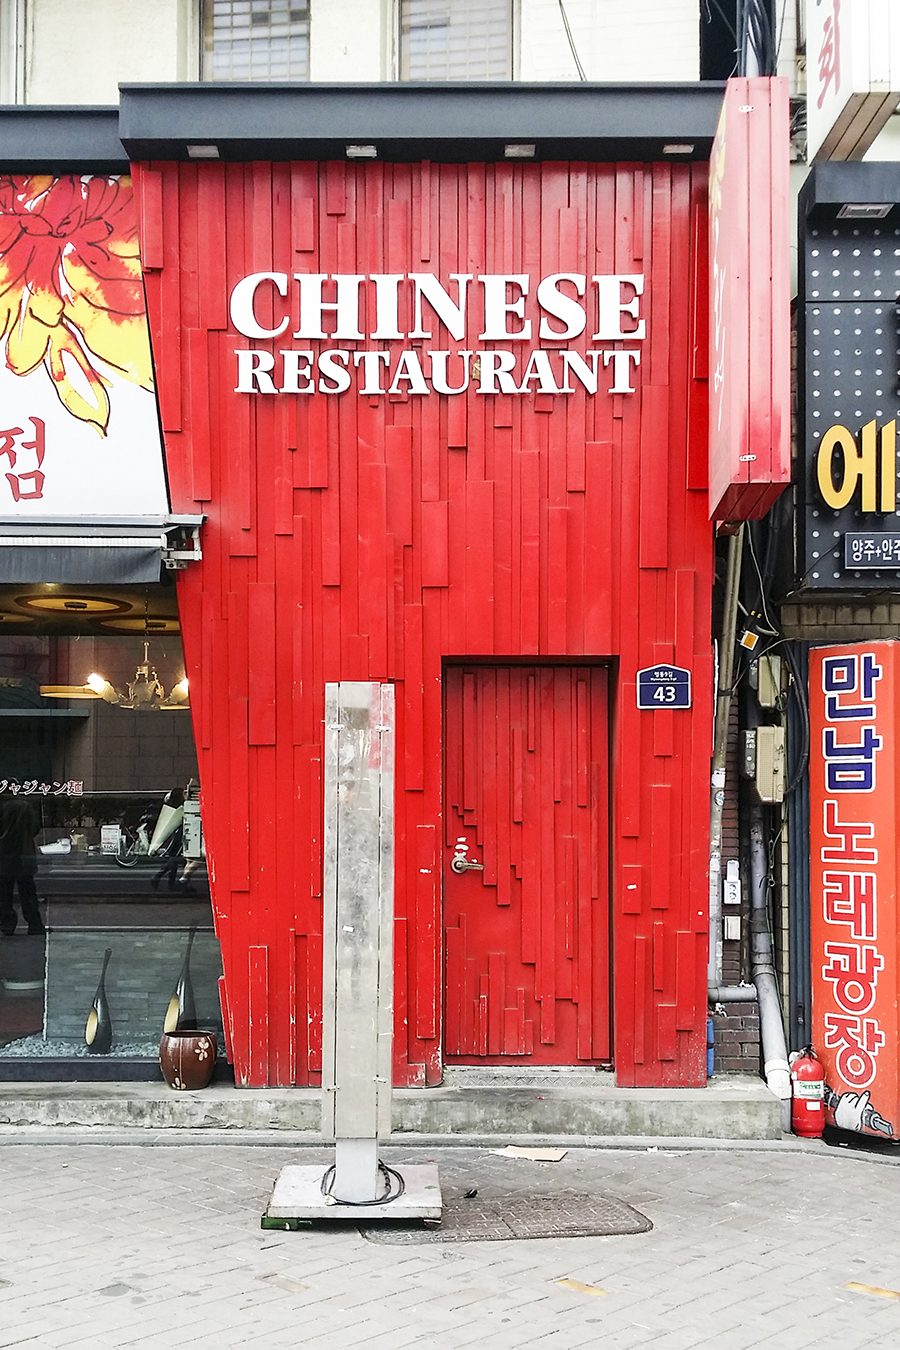 Chinese Restaurant in the shape of a chinese takeaway box in Myeongdong, Seoul, South Korea.